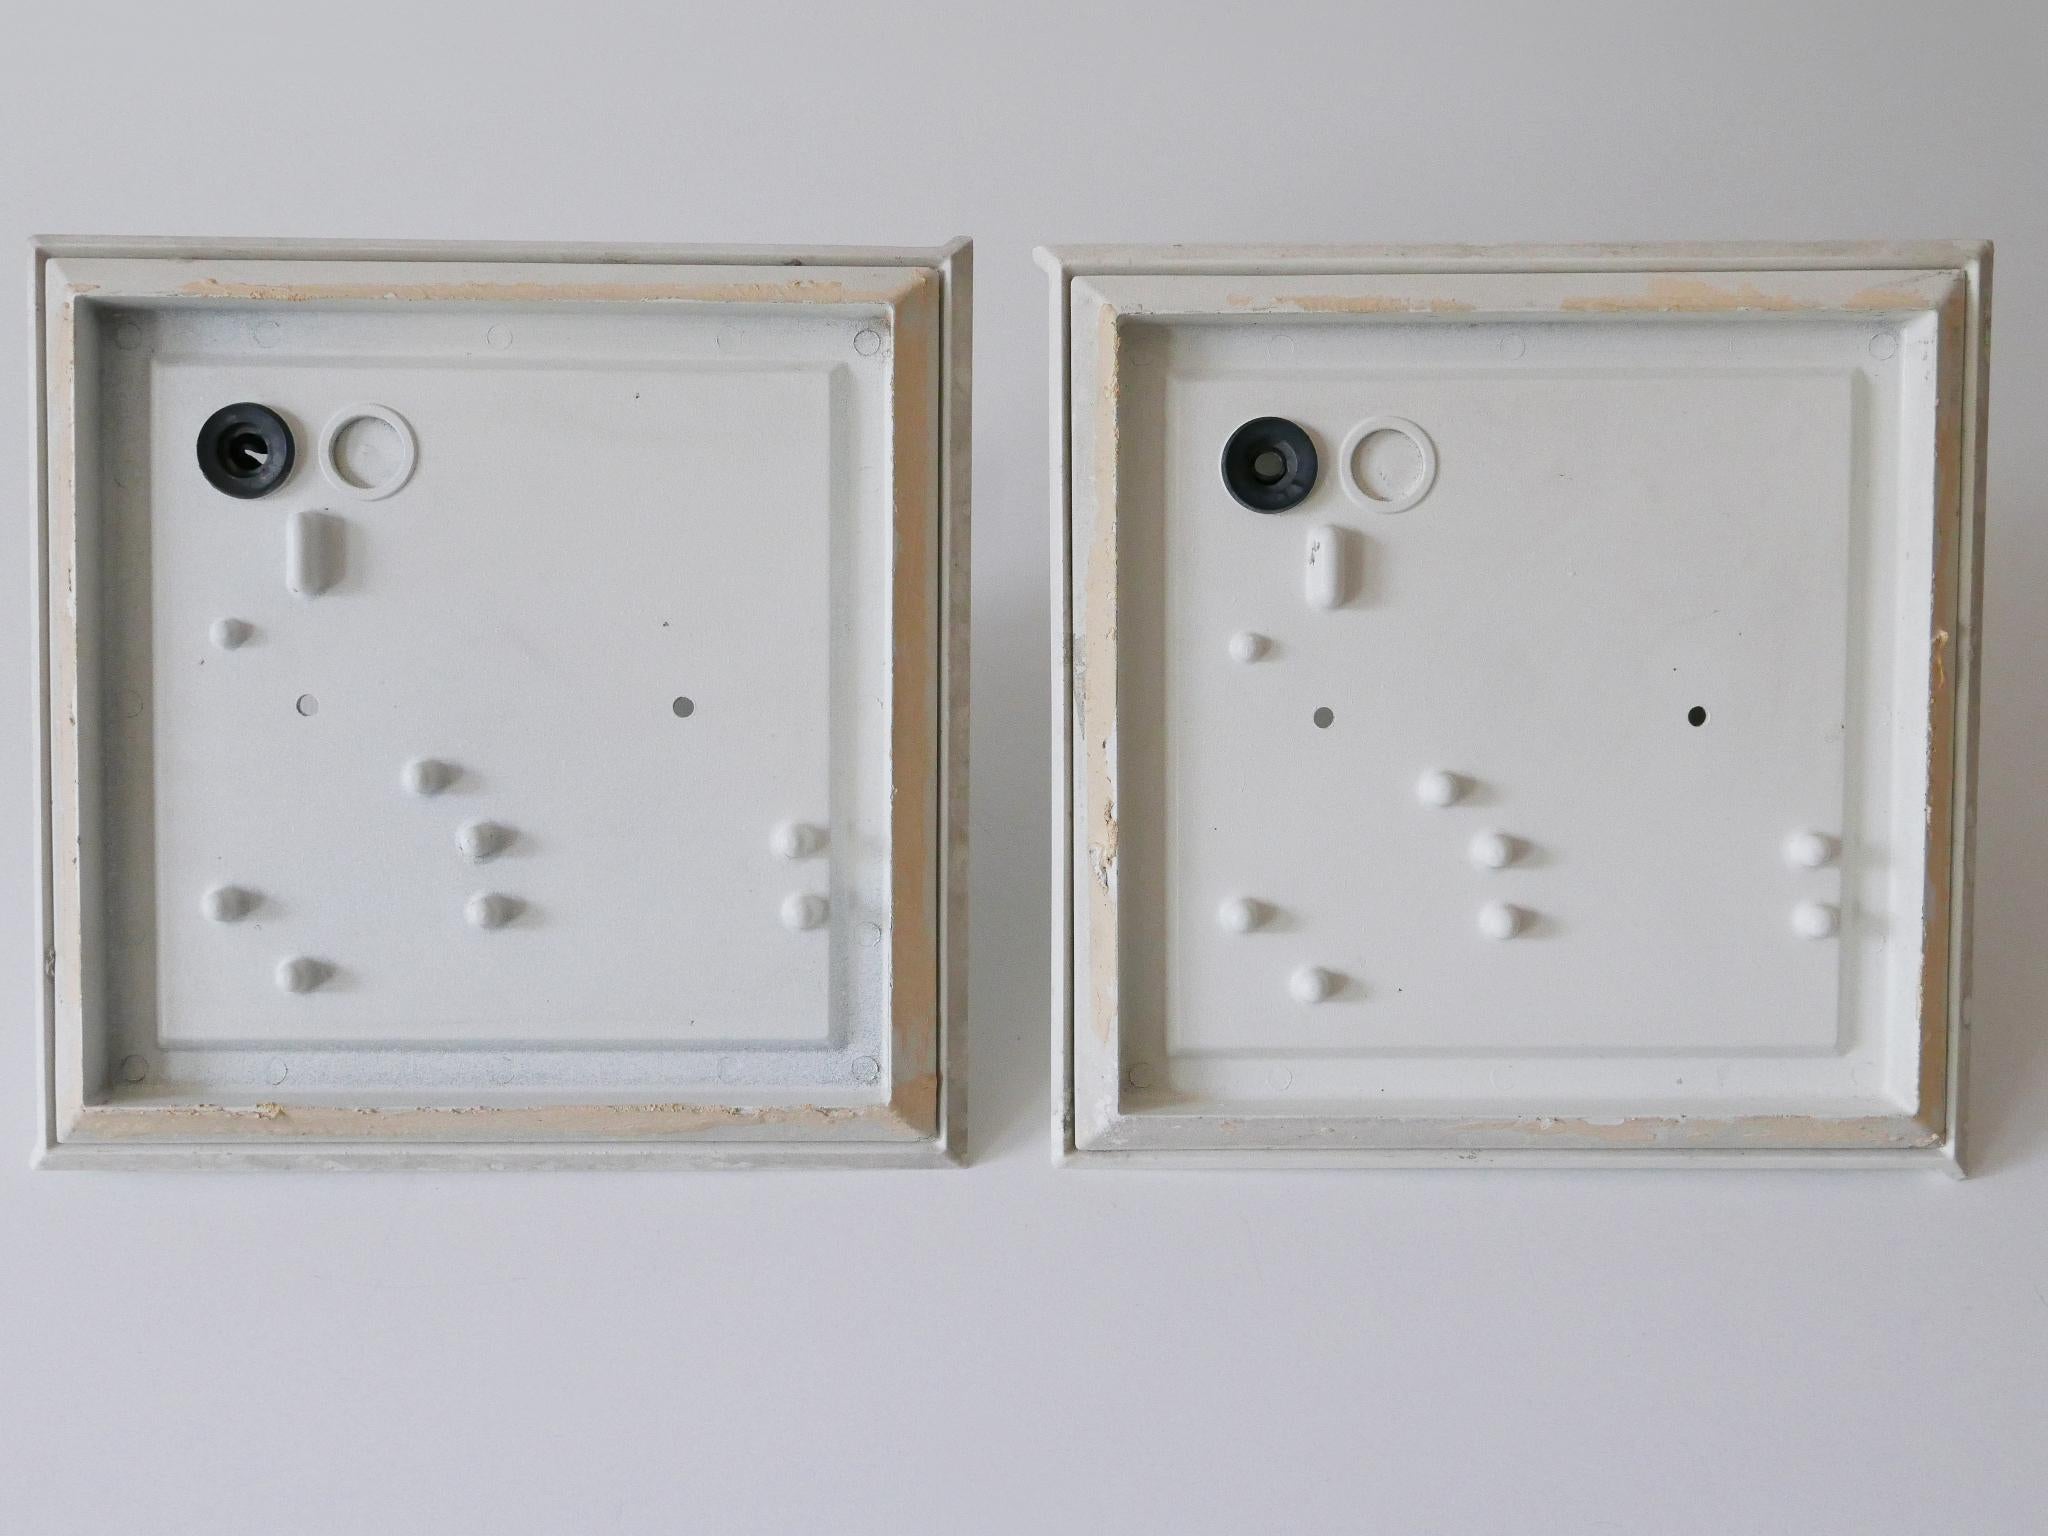 Set of Two Medium Outdoor Wall Lamps or Sconces by BEGA, 1980s, Germany For Sale 5